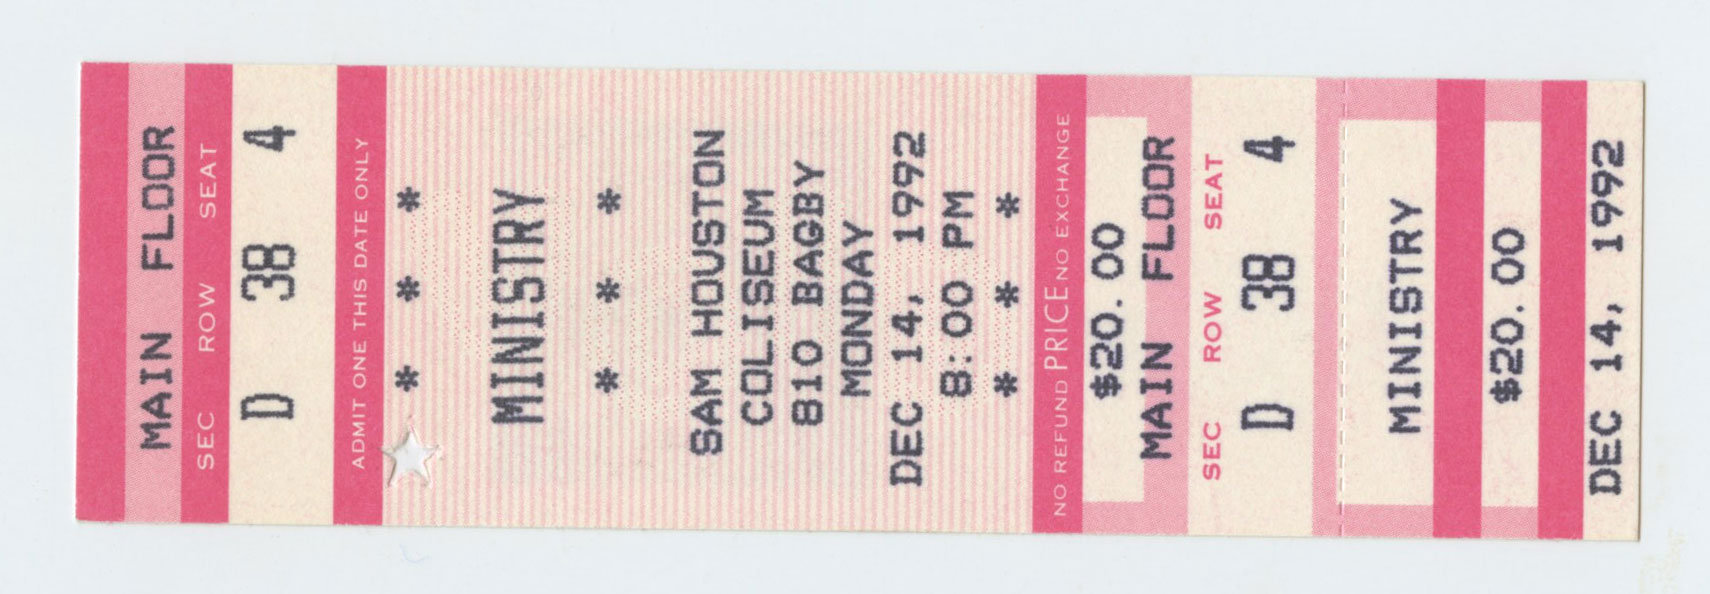 1992 Ticket Pricing